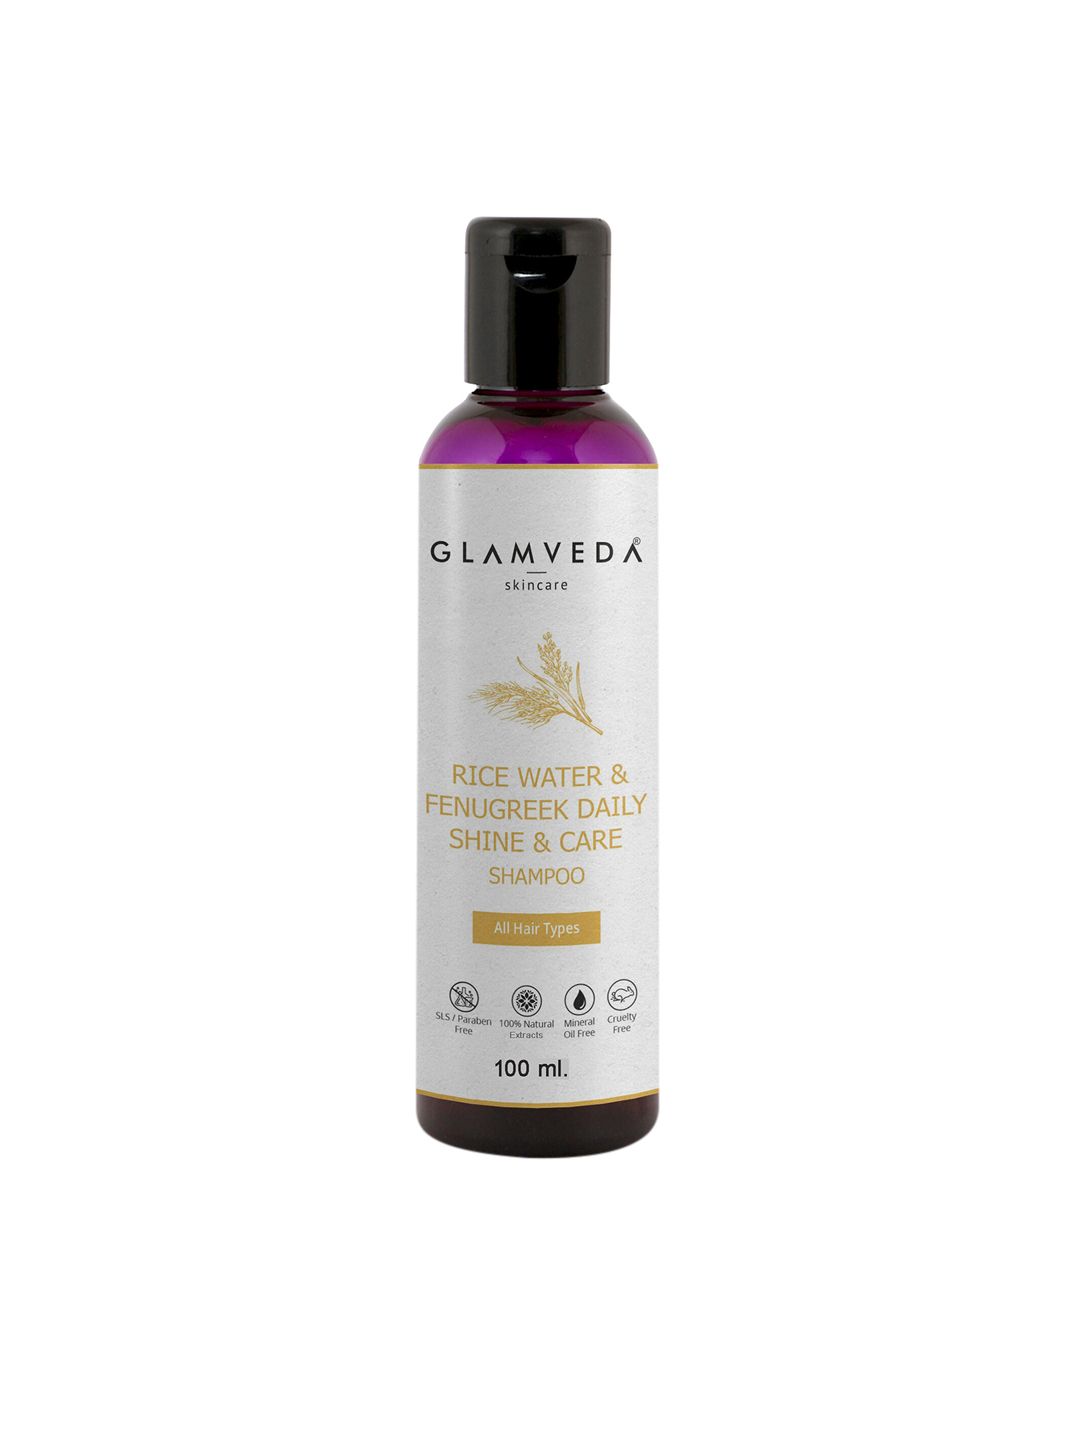 GLAMVEDA Daily Shine & Care Shampoo with Rice Water & Fenugreek - 100 ml Price in India